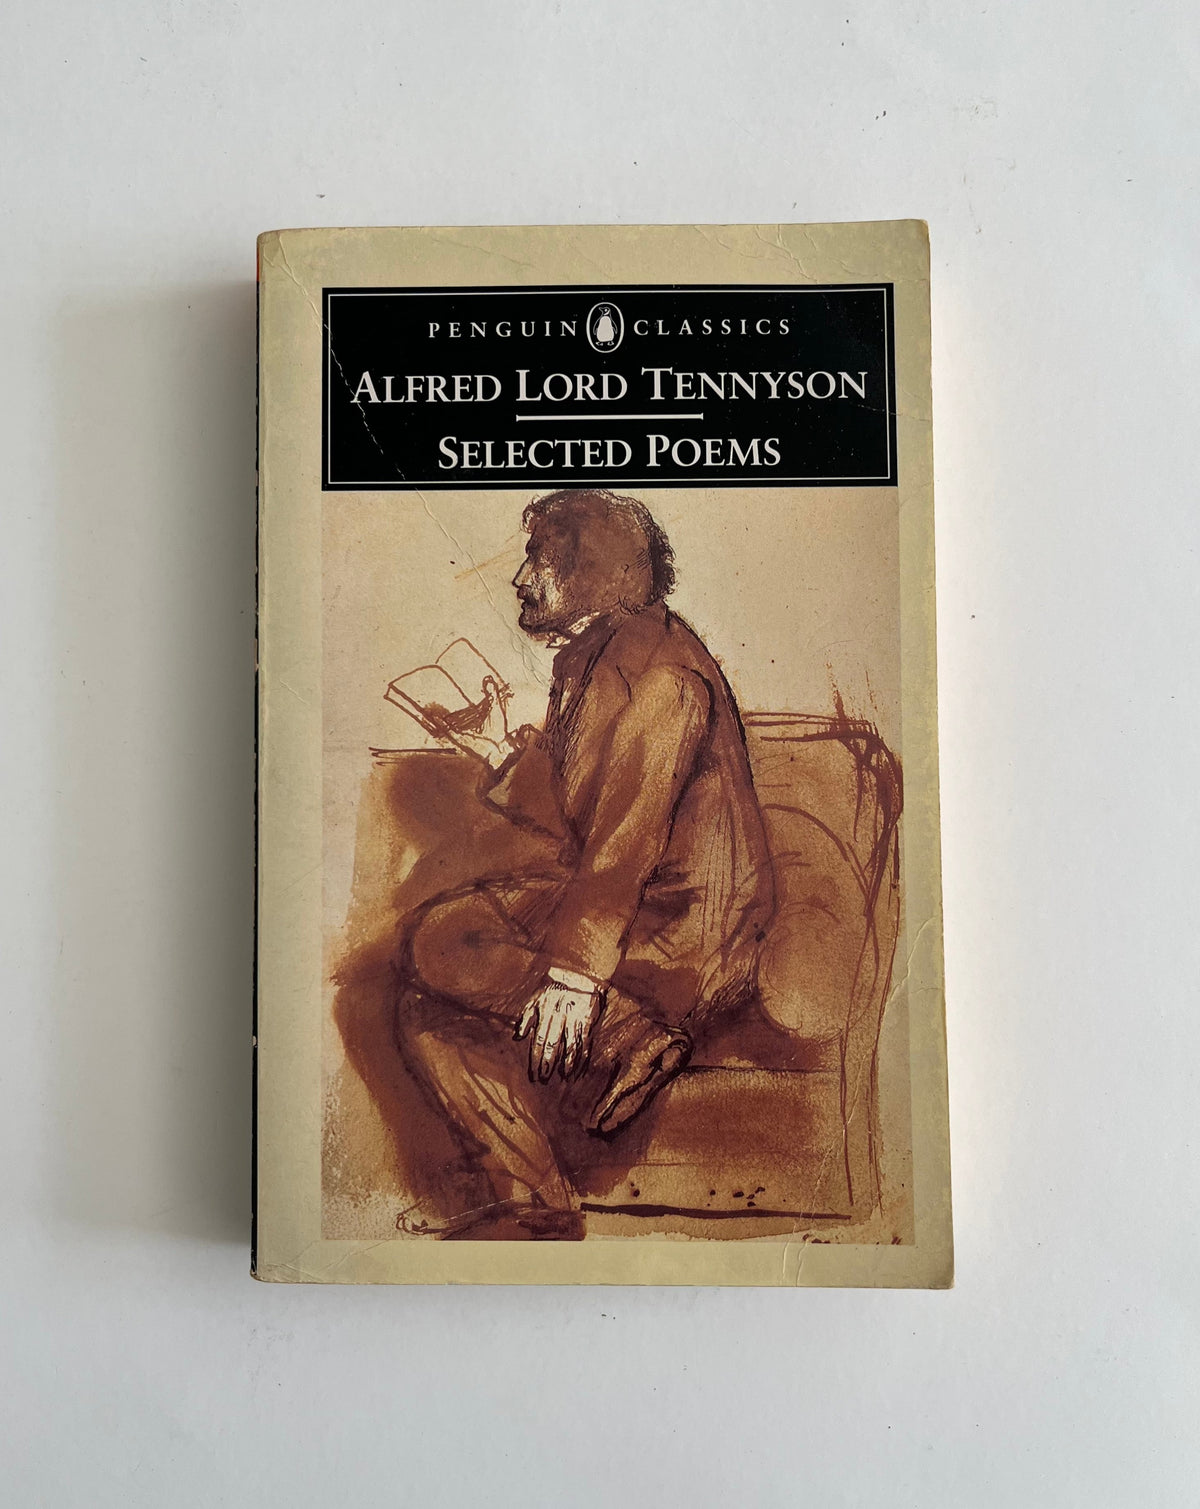 Selected Poems by Alfred Lord Tennyson